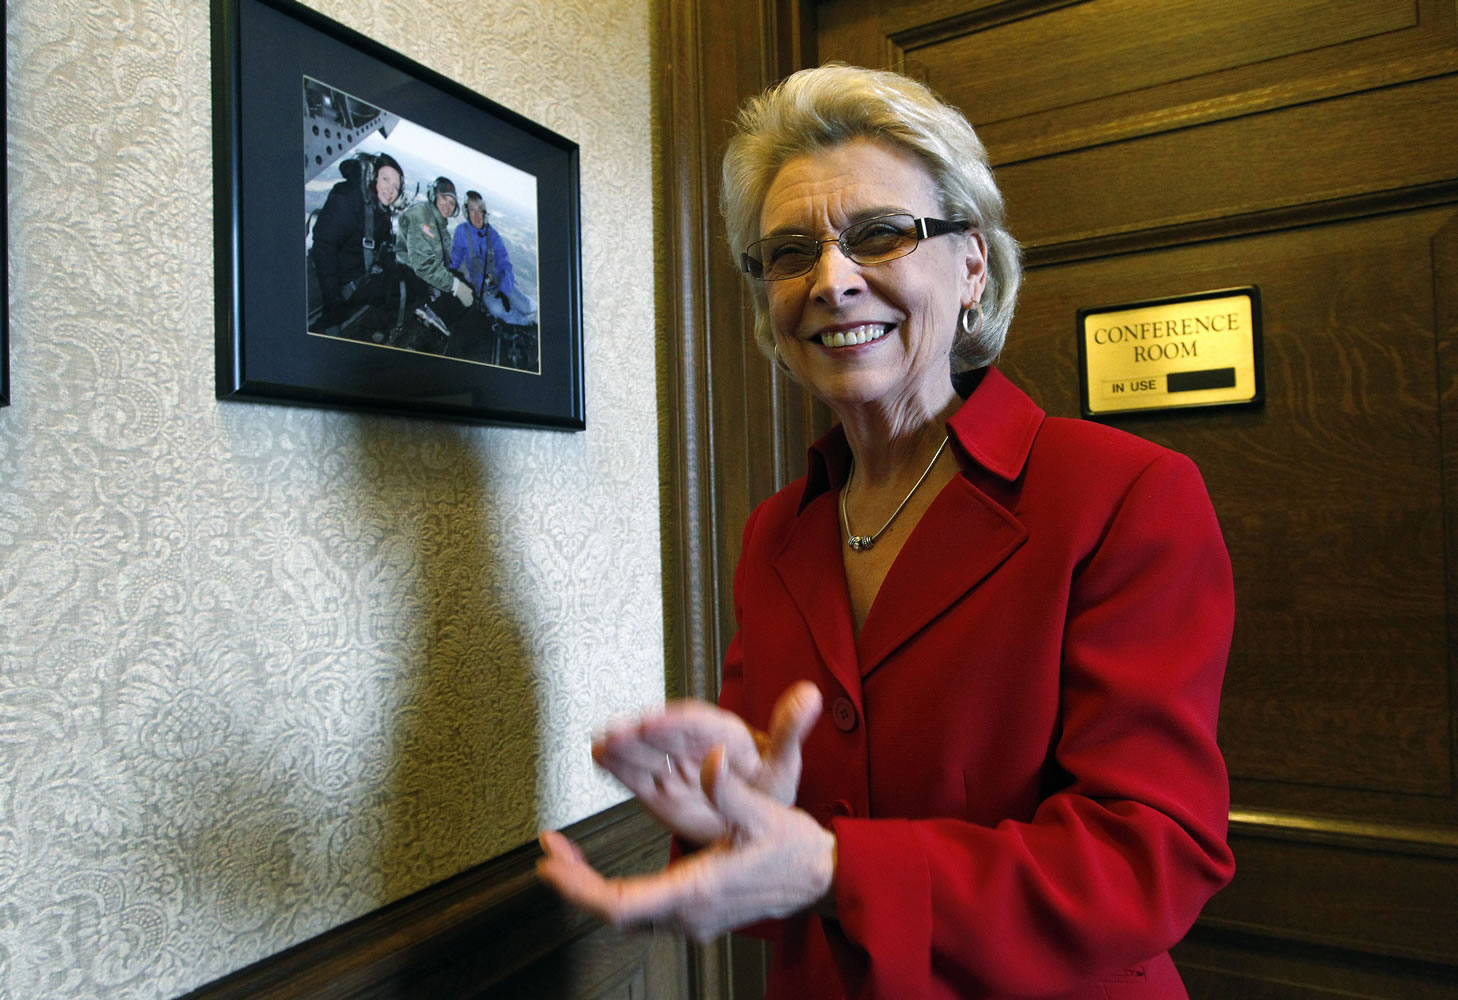 Two-term governor Chris Gregoire leaves office next Wednesday.